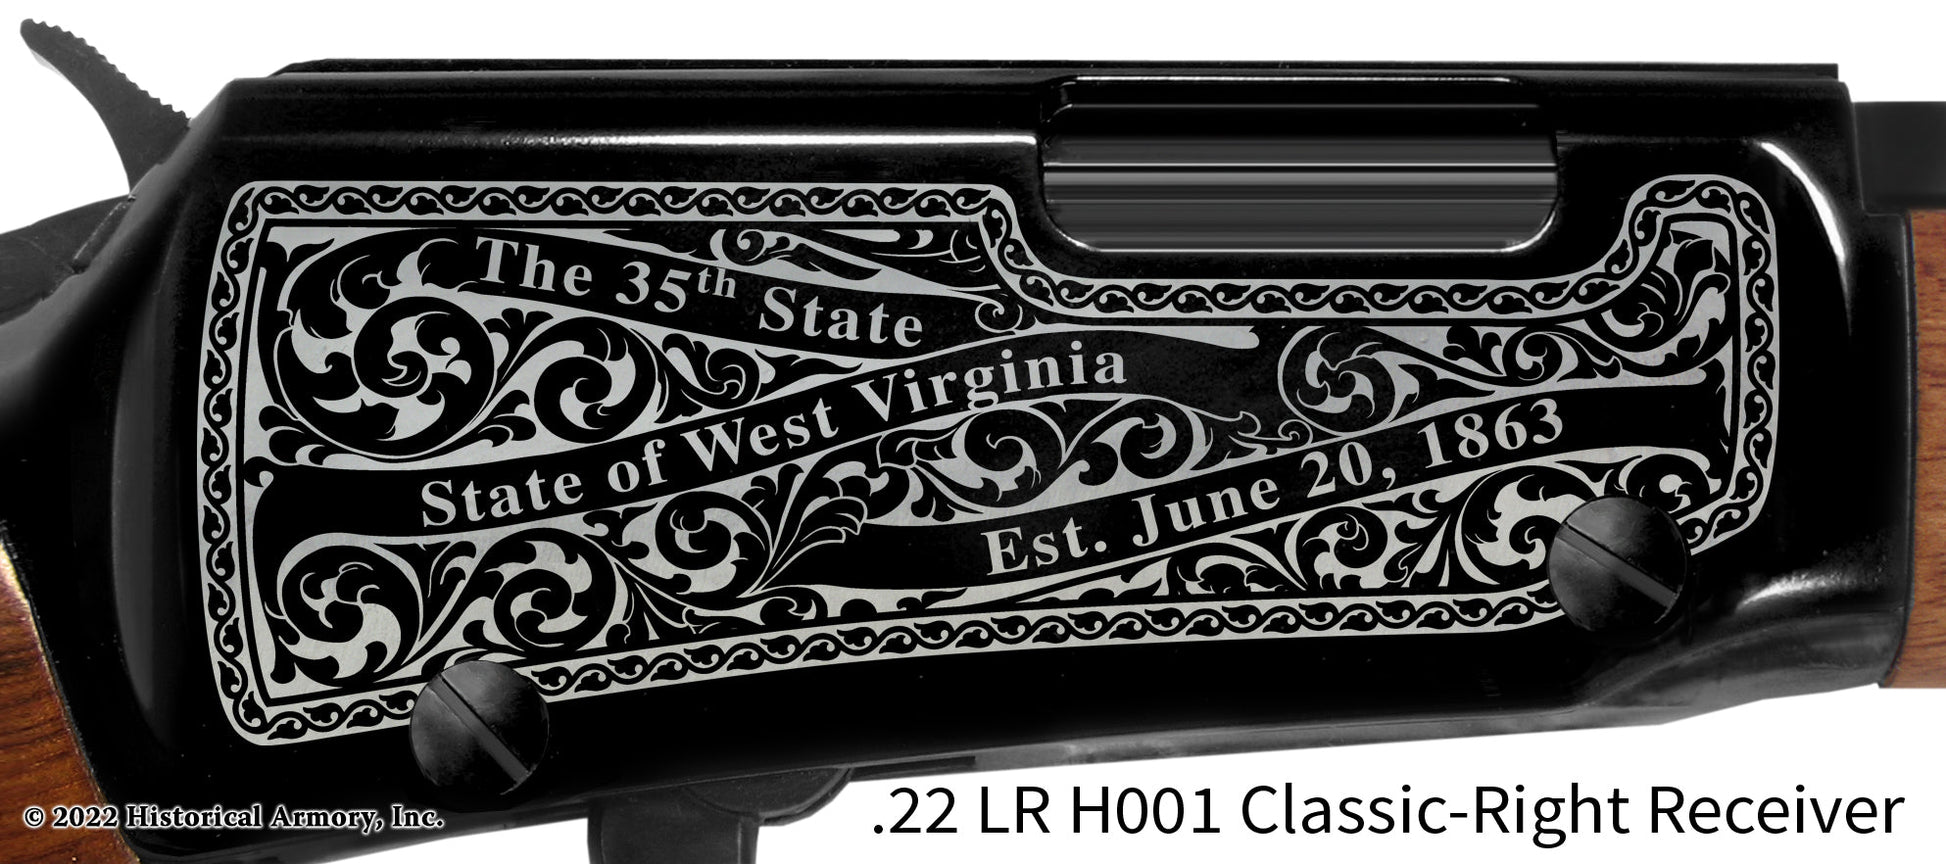 Summers County West Virginia Engraved Henry H001 Rifle